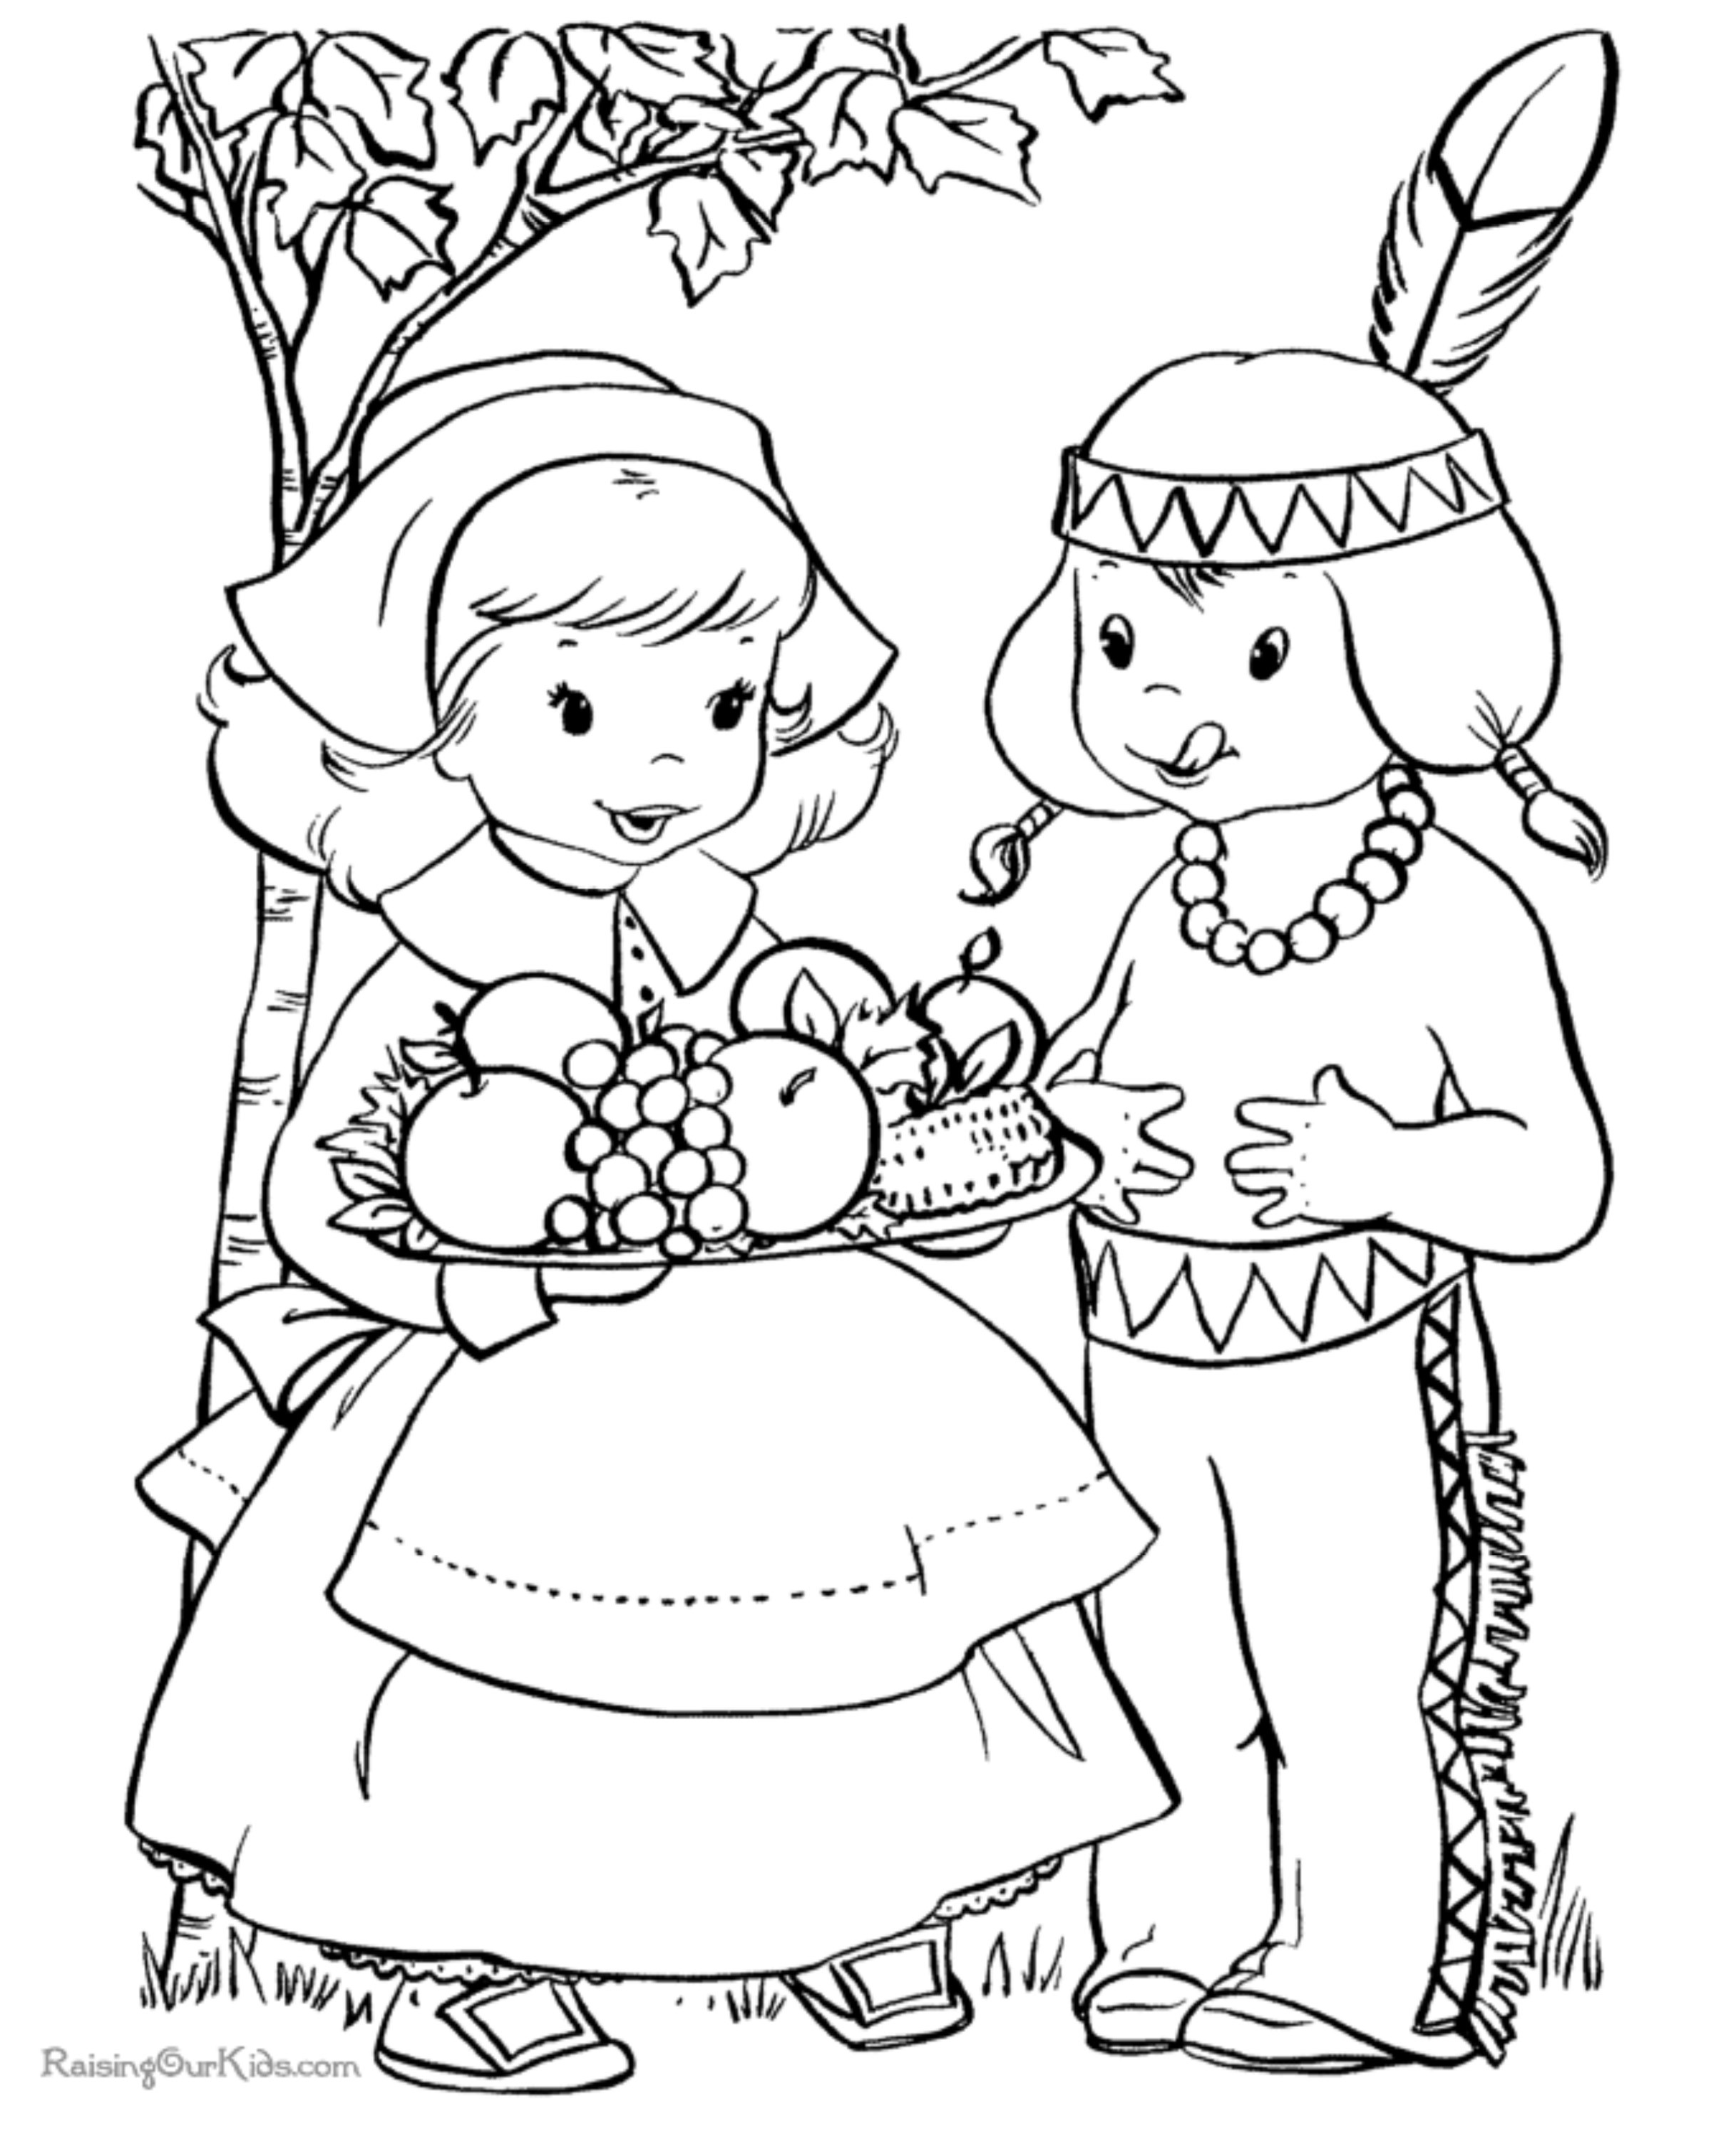 Thanksgiving Coloring Pages
 Kid’s Coloring Pages Northern News